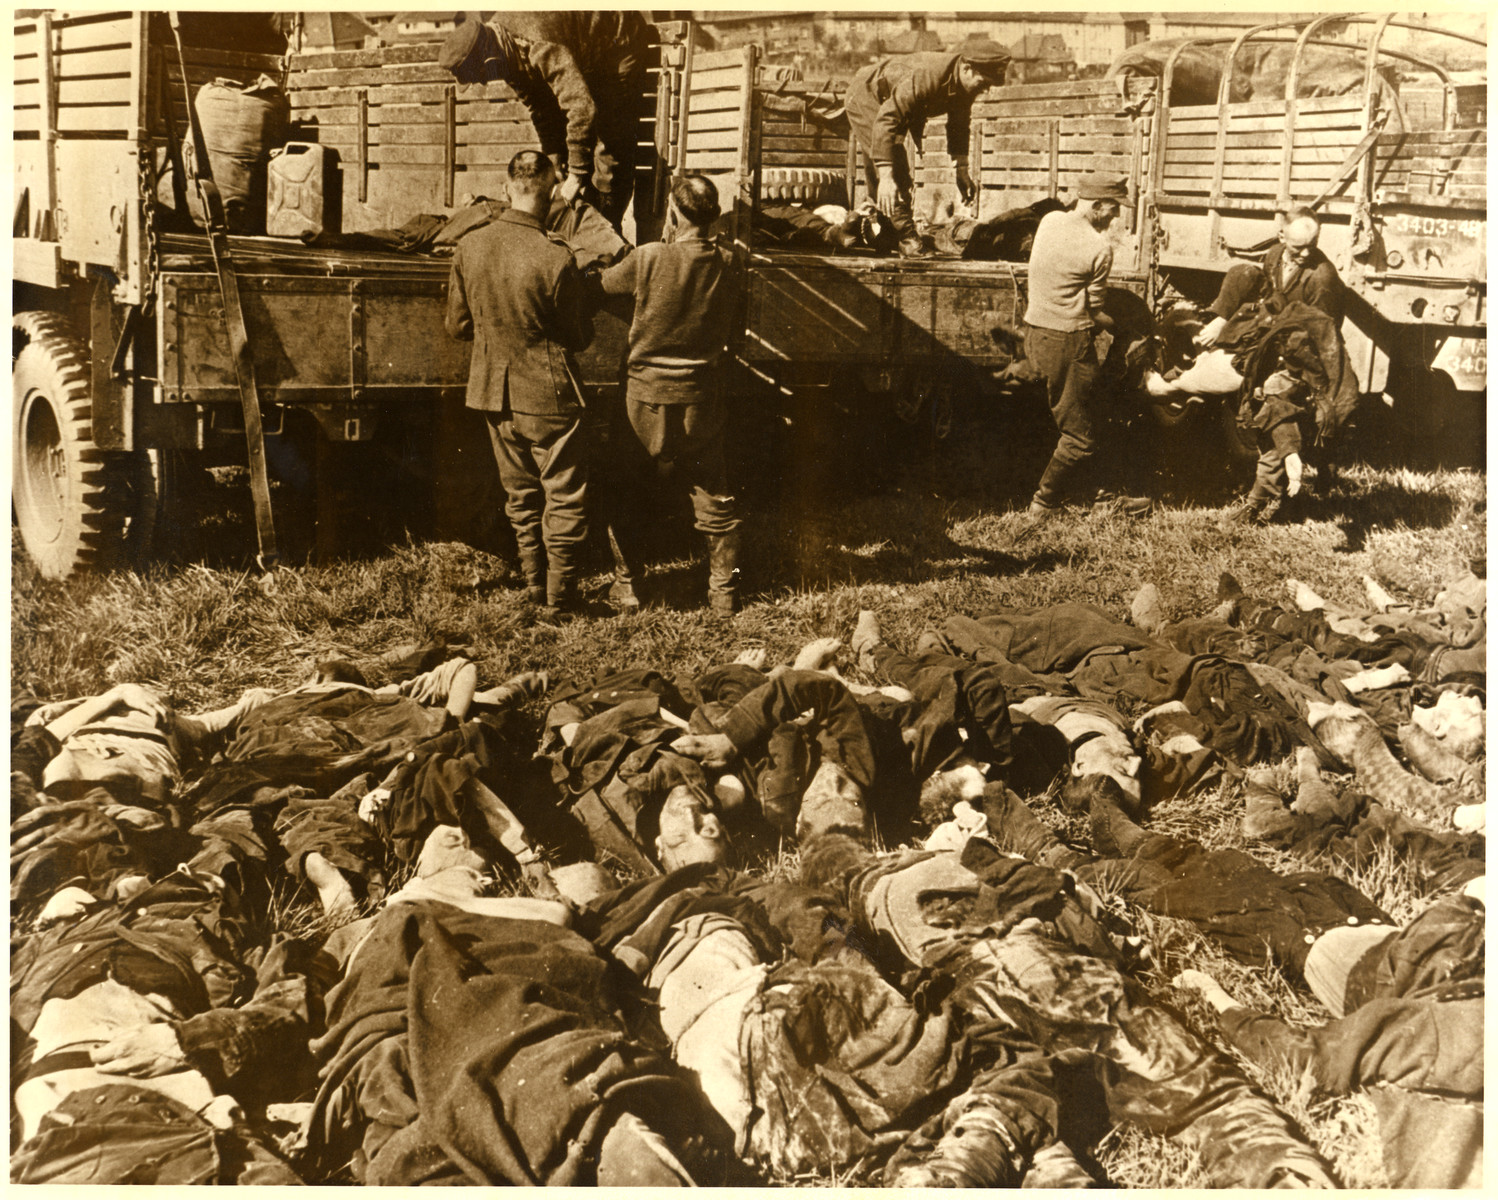 German POWs prepare to bury the bodies of 200 Soviet prisoners who perished in the Hemer POW camp.